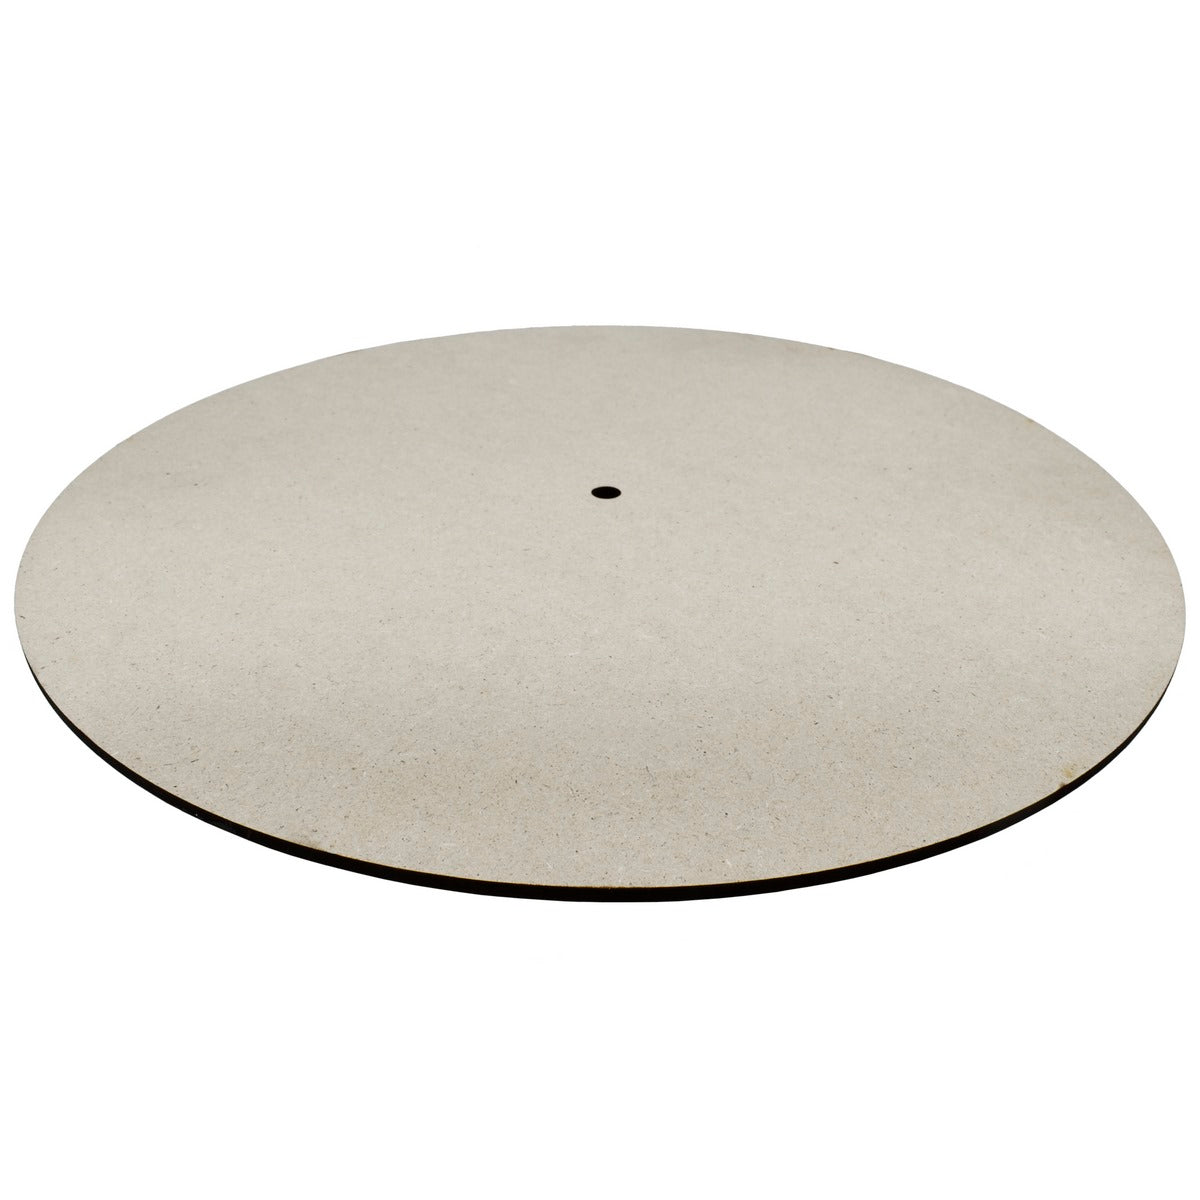 jags-mumbai MDF MDF Plate Round with hole 16 Inch 4mm MPRW03